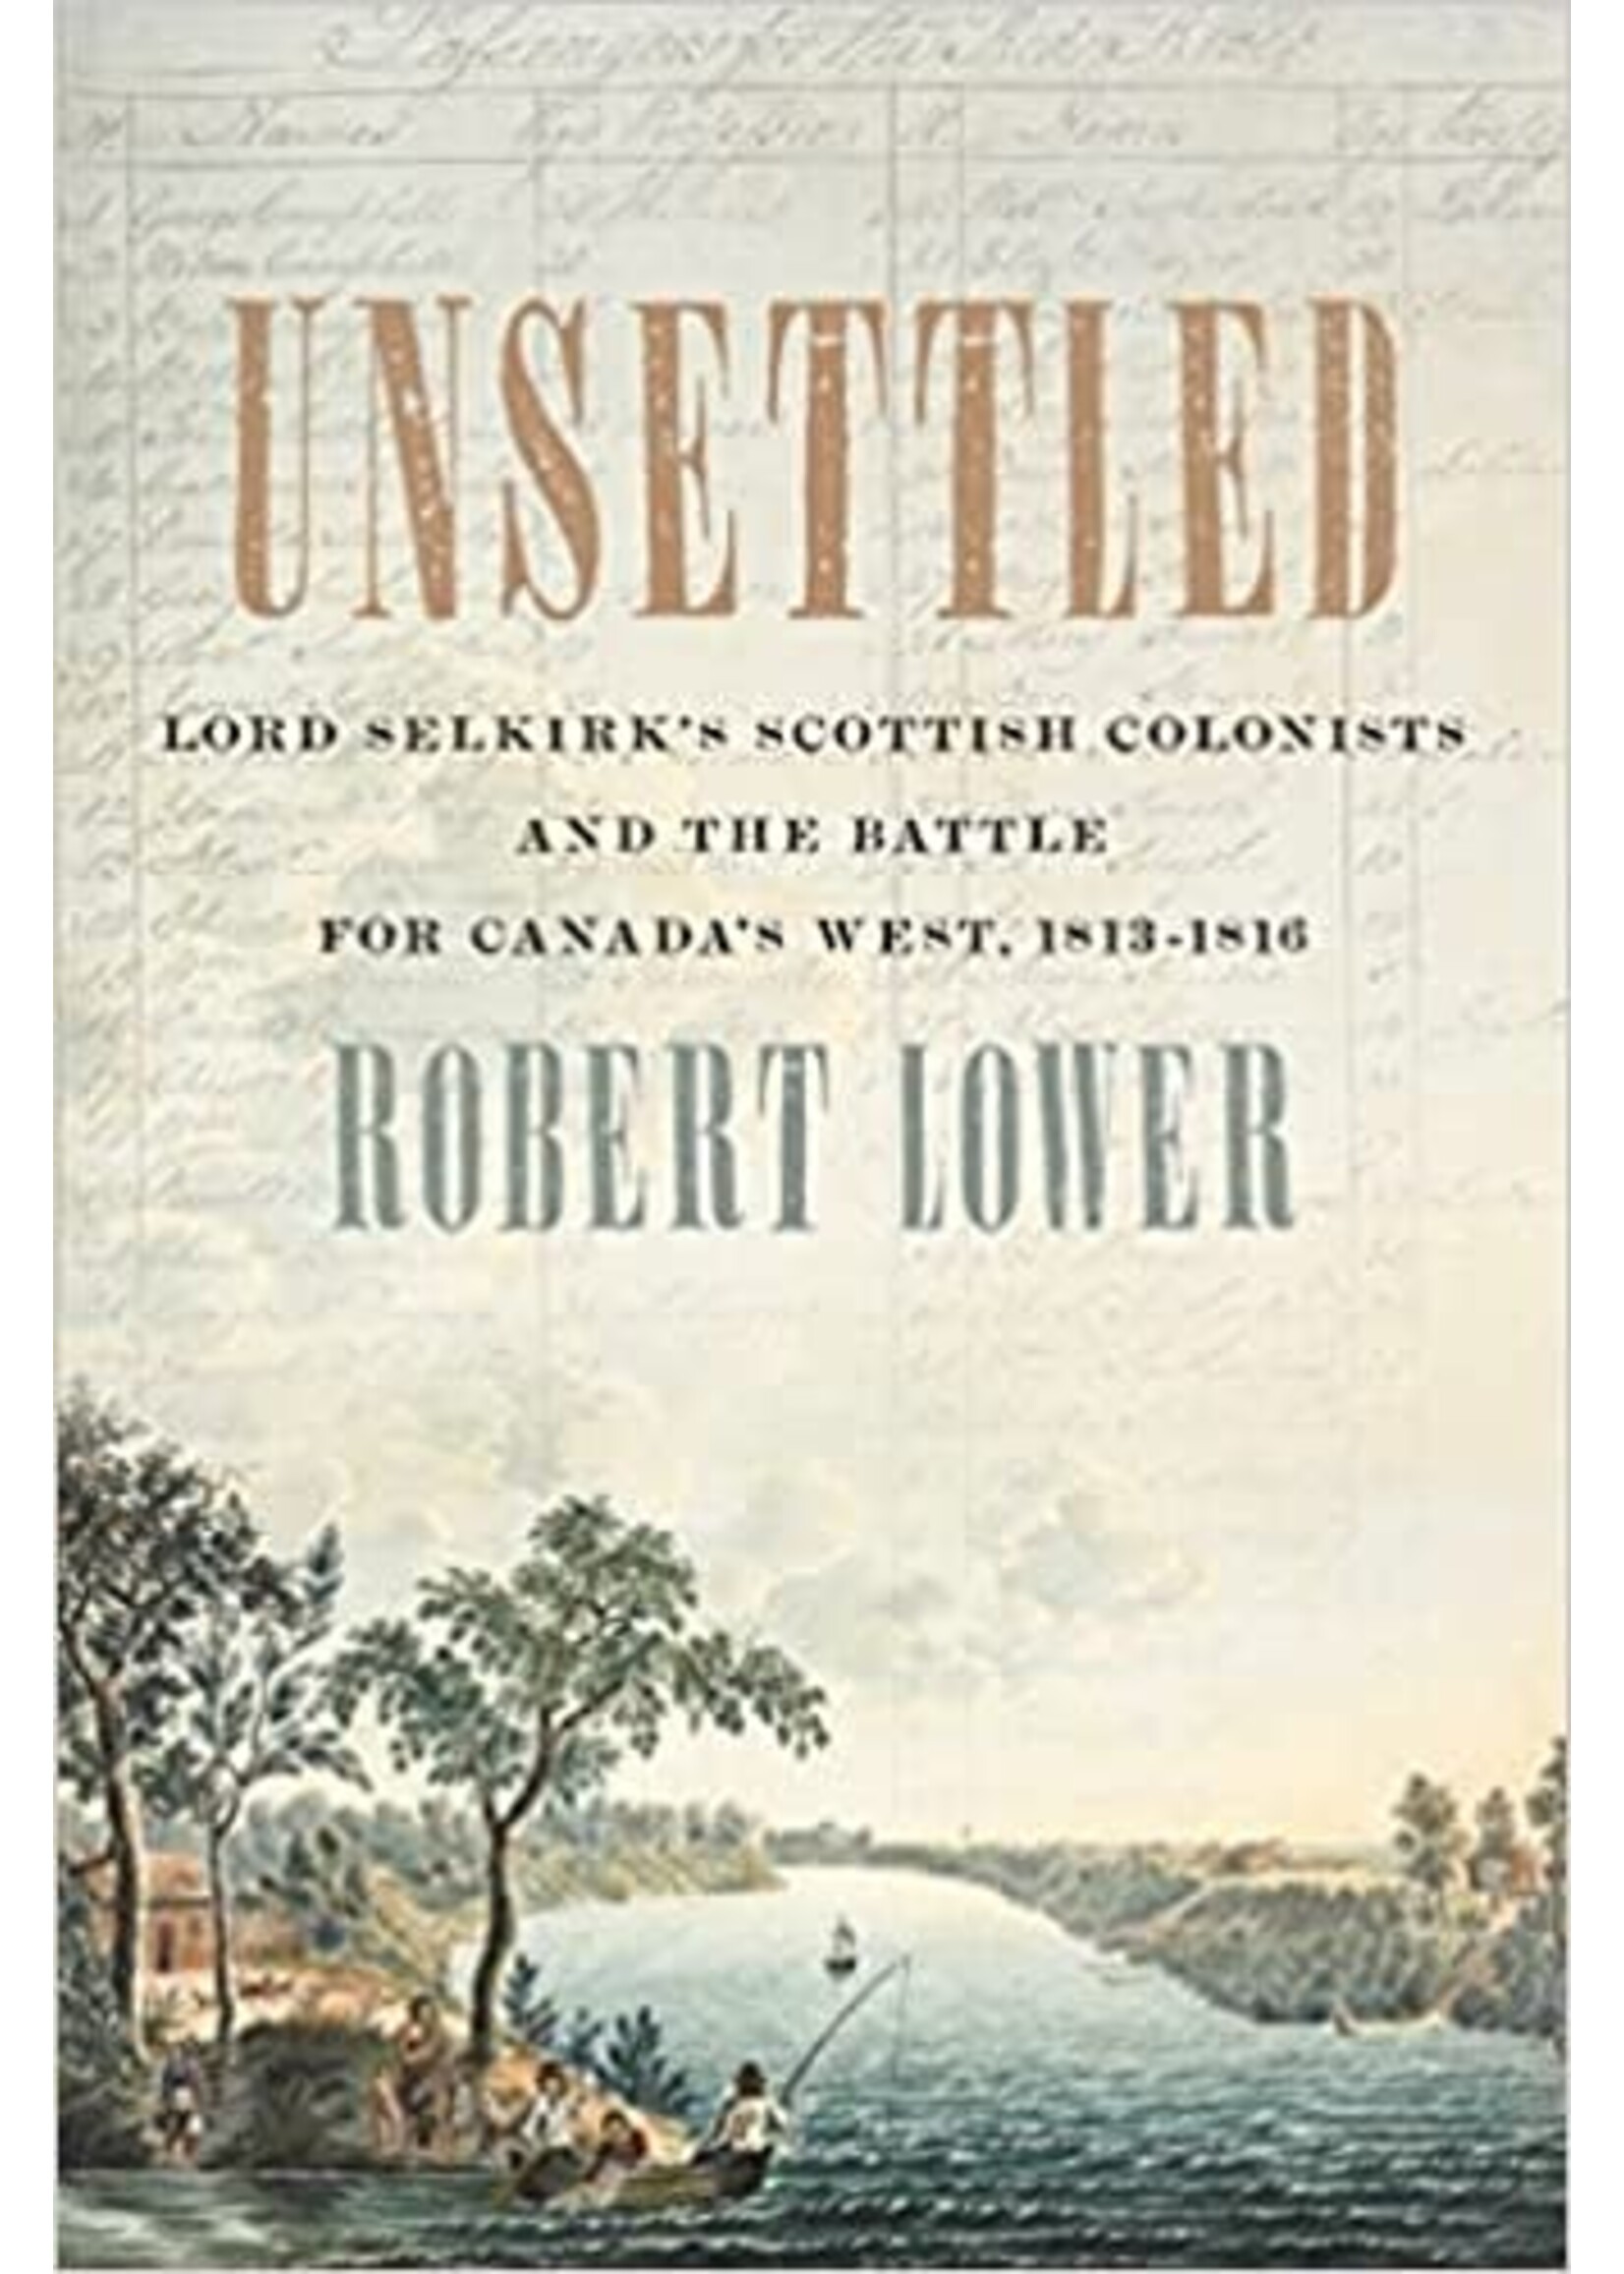 Unsettled: Lord Selkirk’s Scottish Colonists and the Battle for Canada’s West, 1813–1816 by Robert Lower